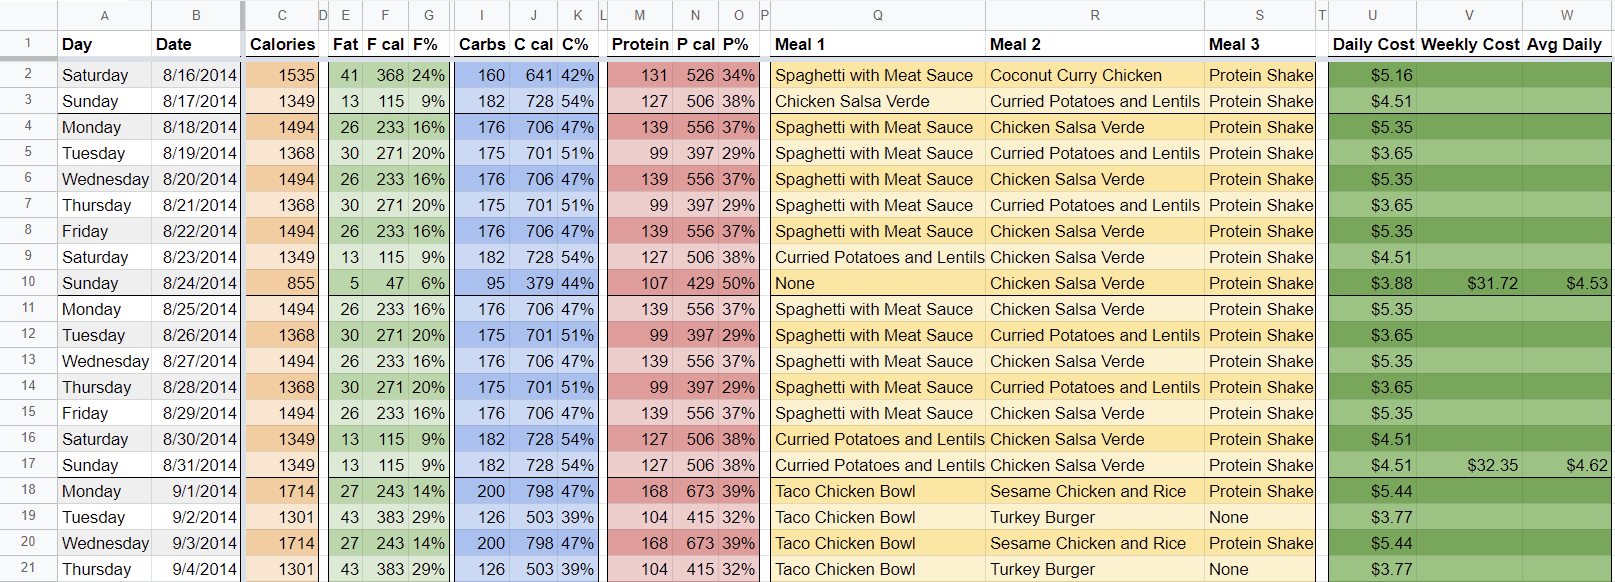 Google Sheets Nutrition Template